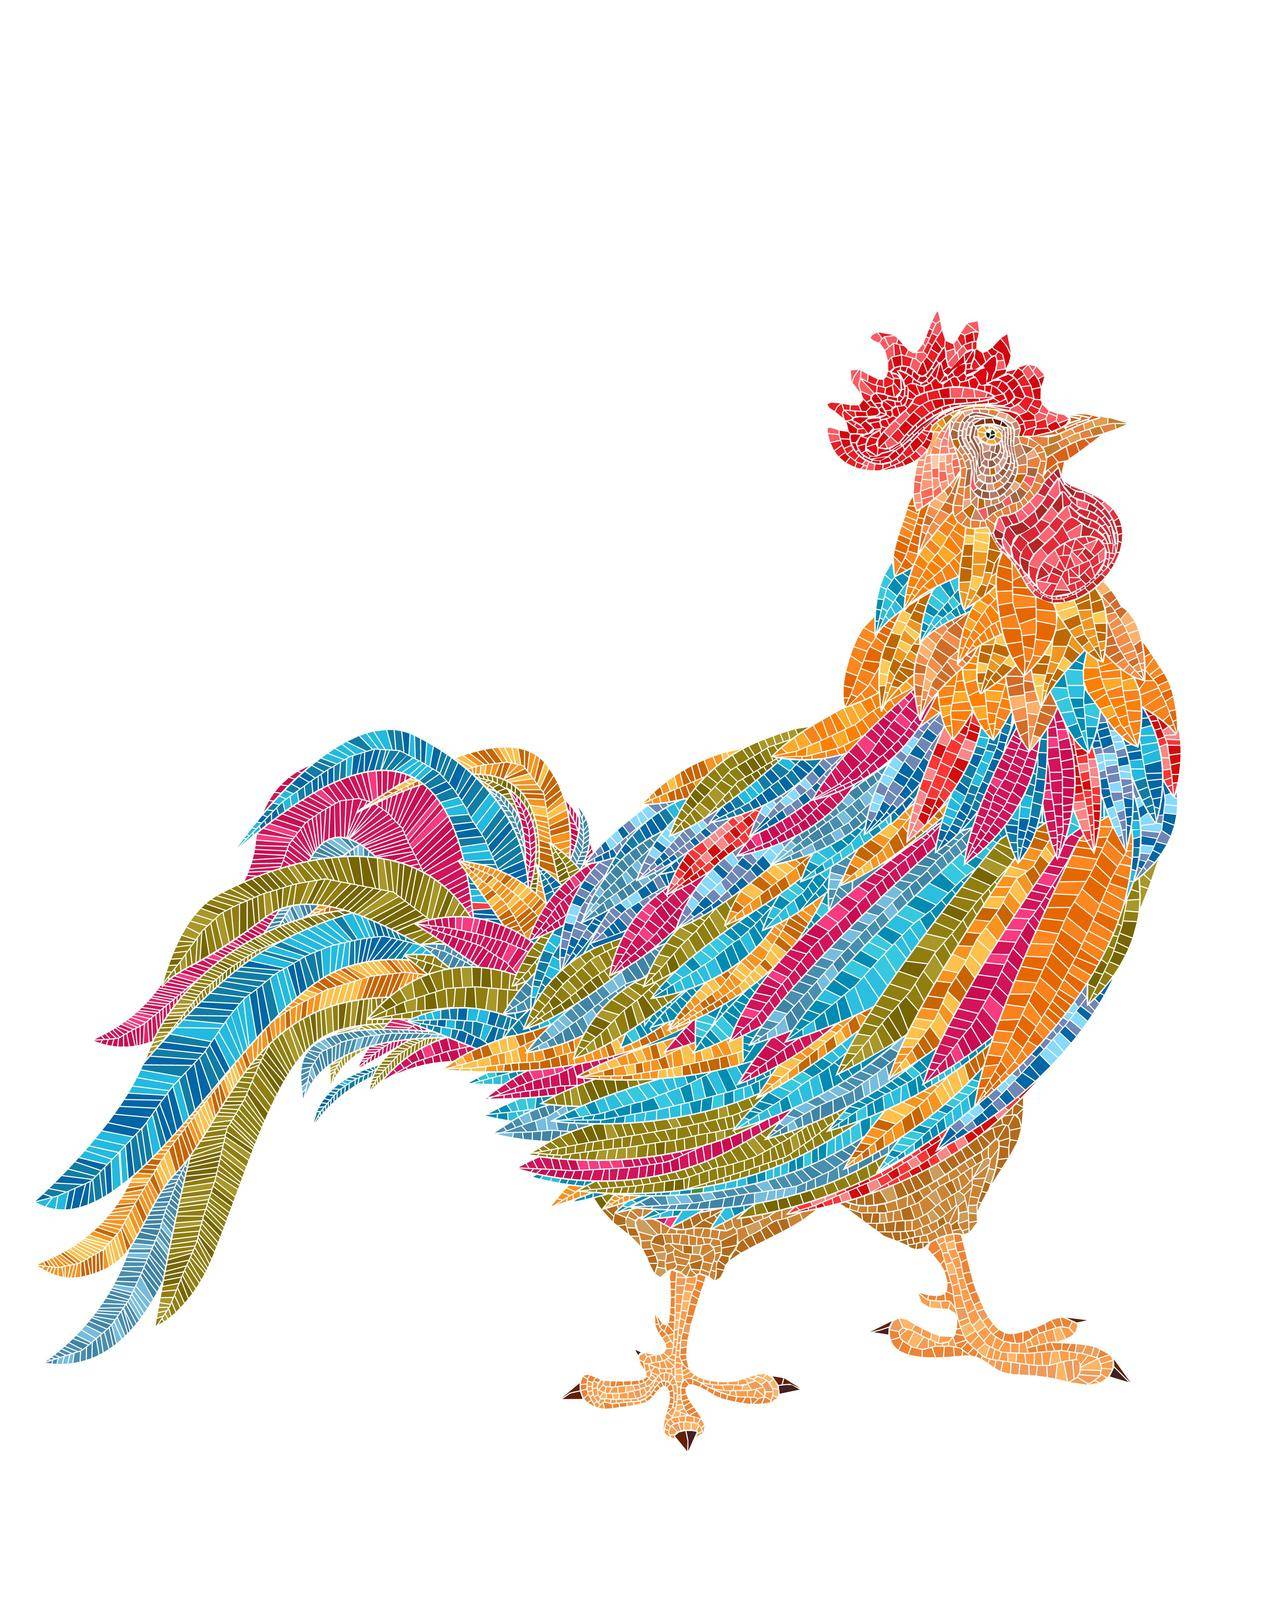 Rooster mosaic vector over white background